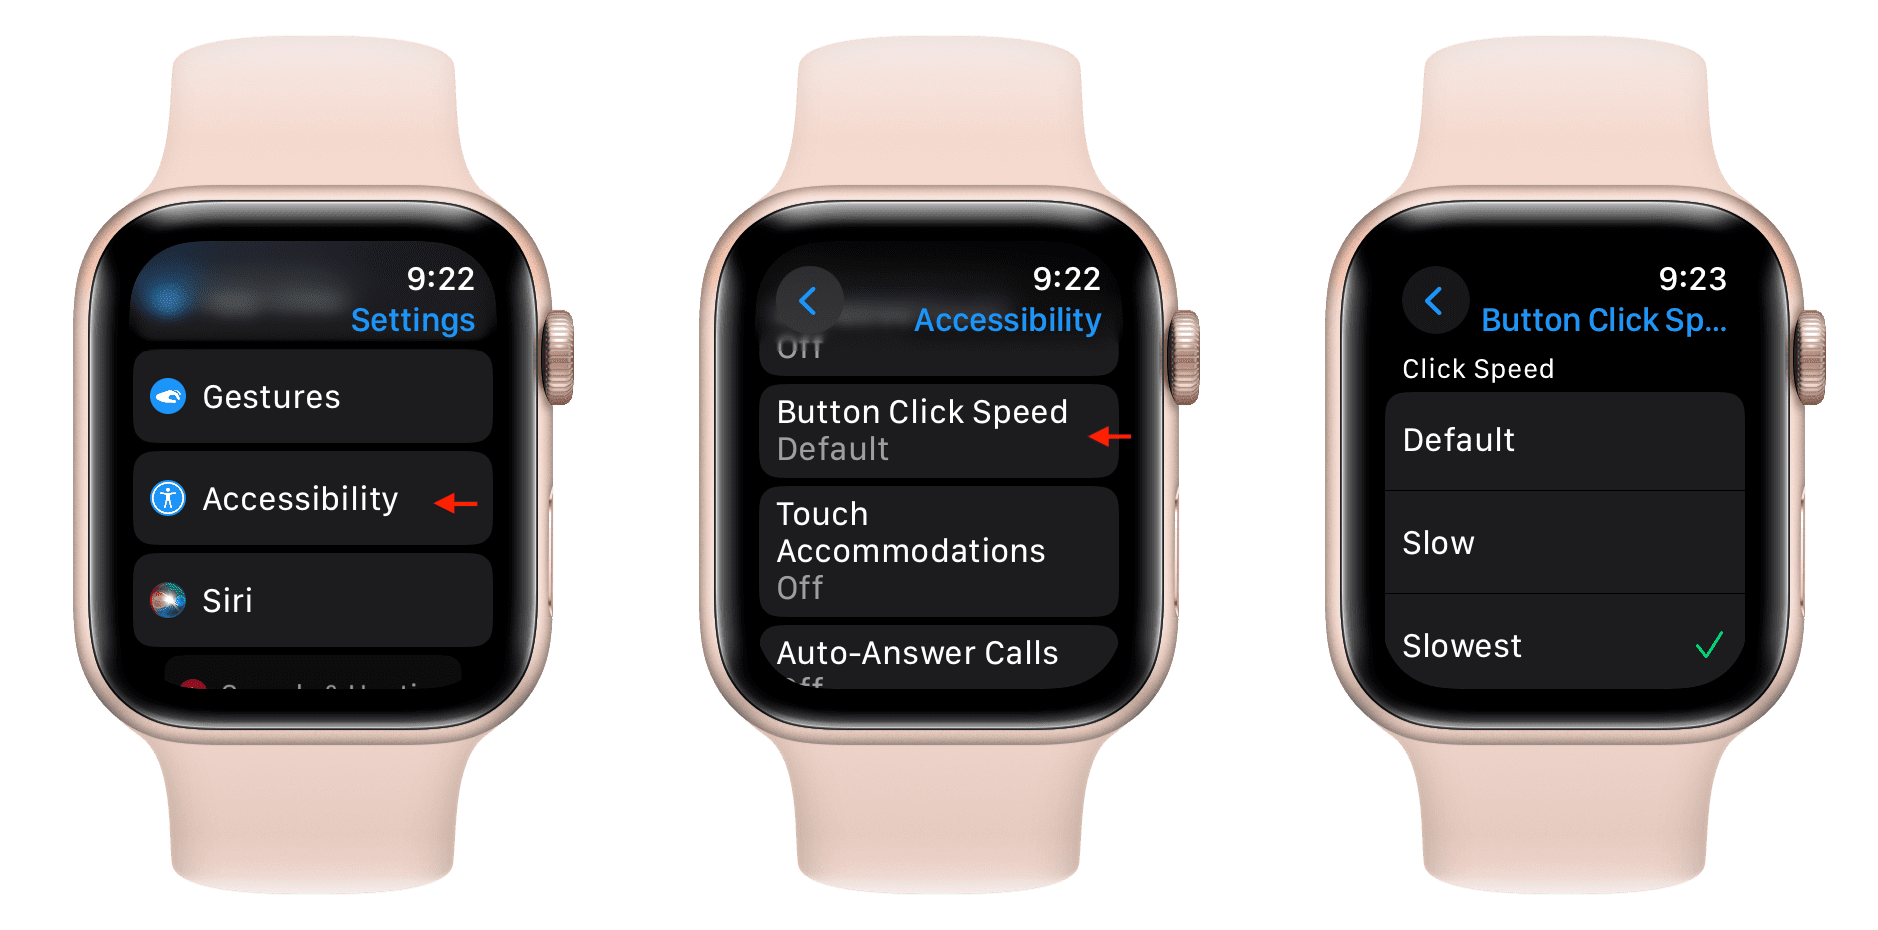 Button Click Speed in Apple Watch Accessibility settings